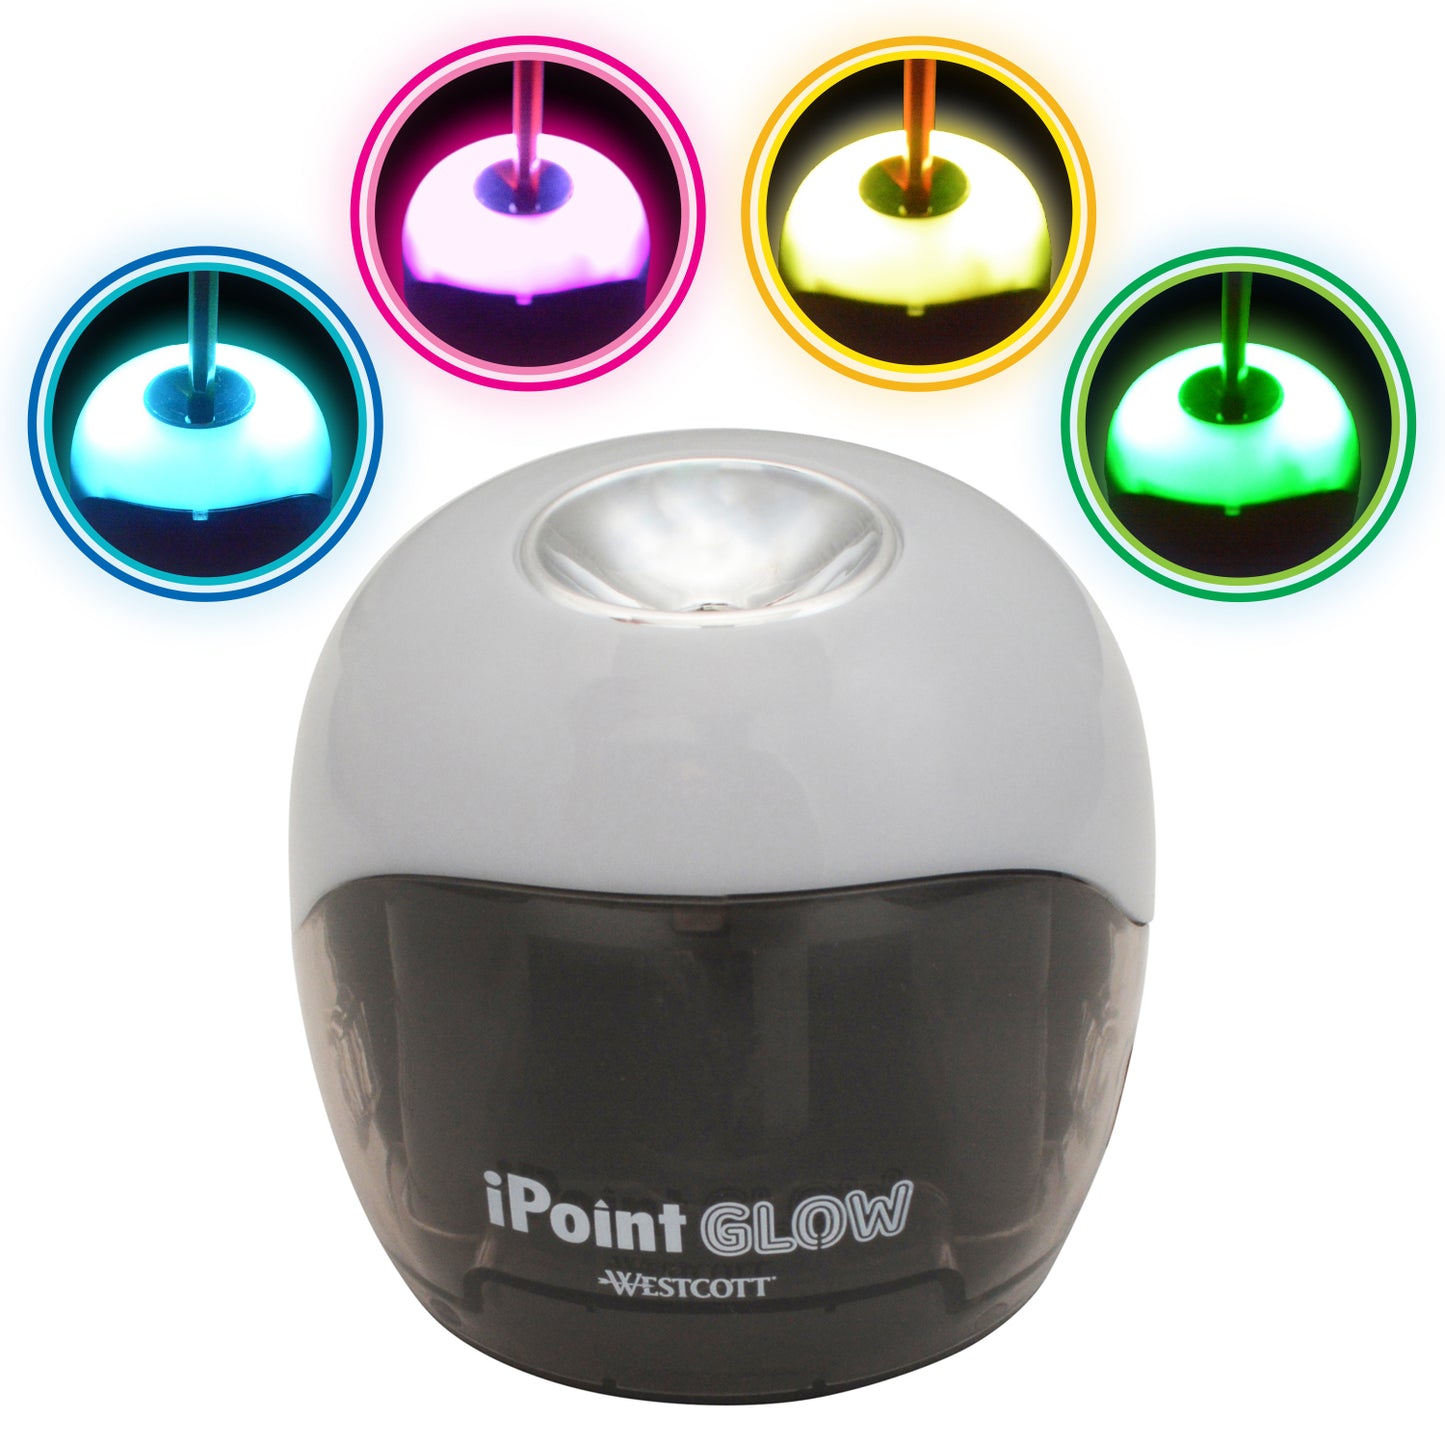 iPoint® Glow Color Changing Battery Pencil Sharpener, Assorted Colors (No Color Choice)